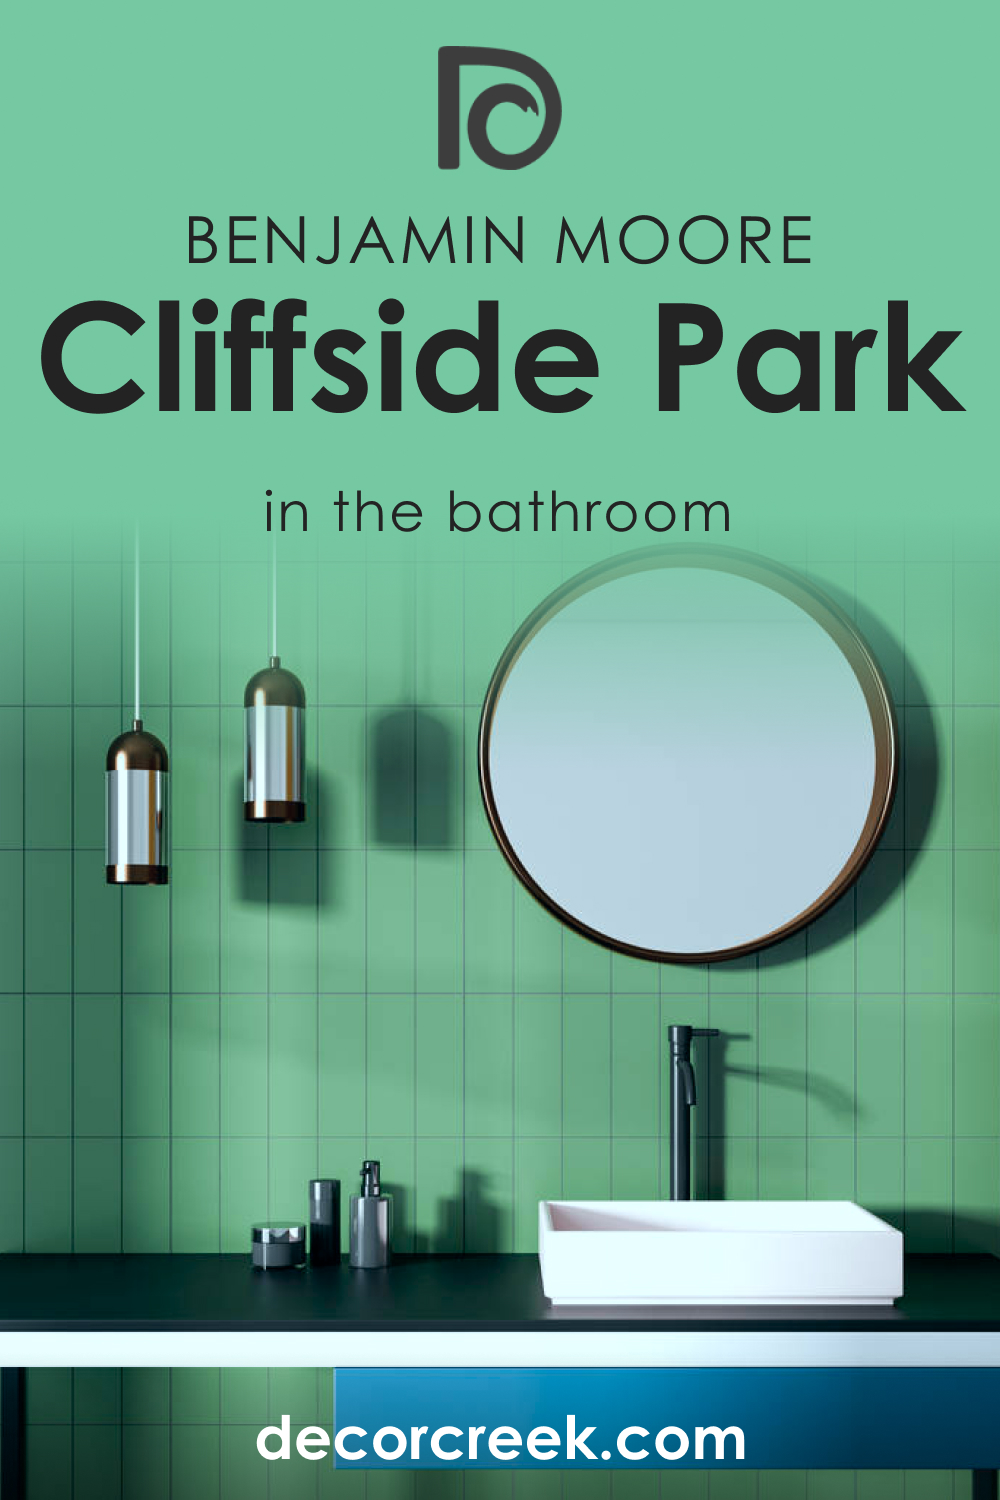 How to Use Cliffside Park 579 in the Bathroom?